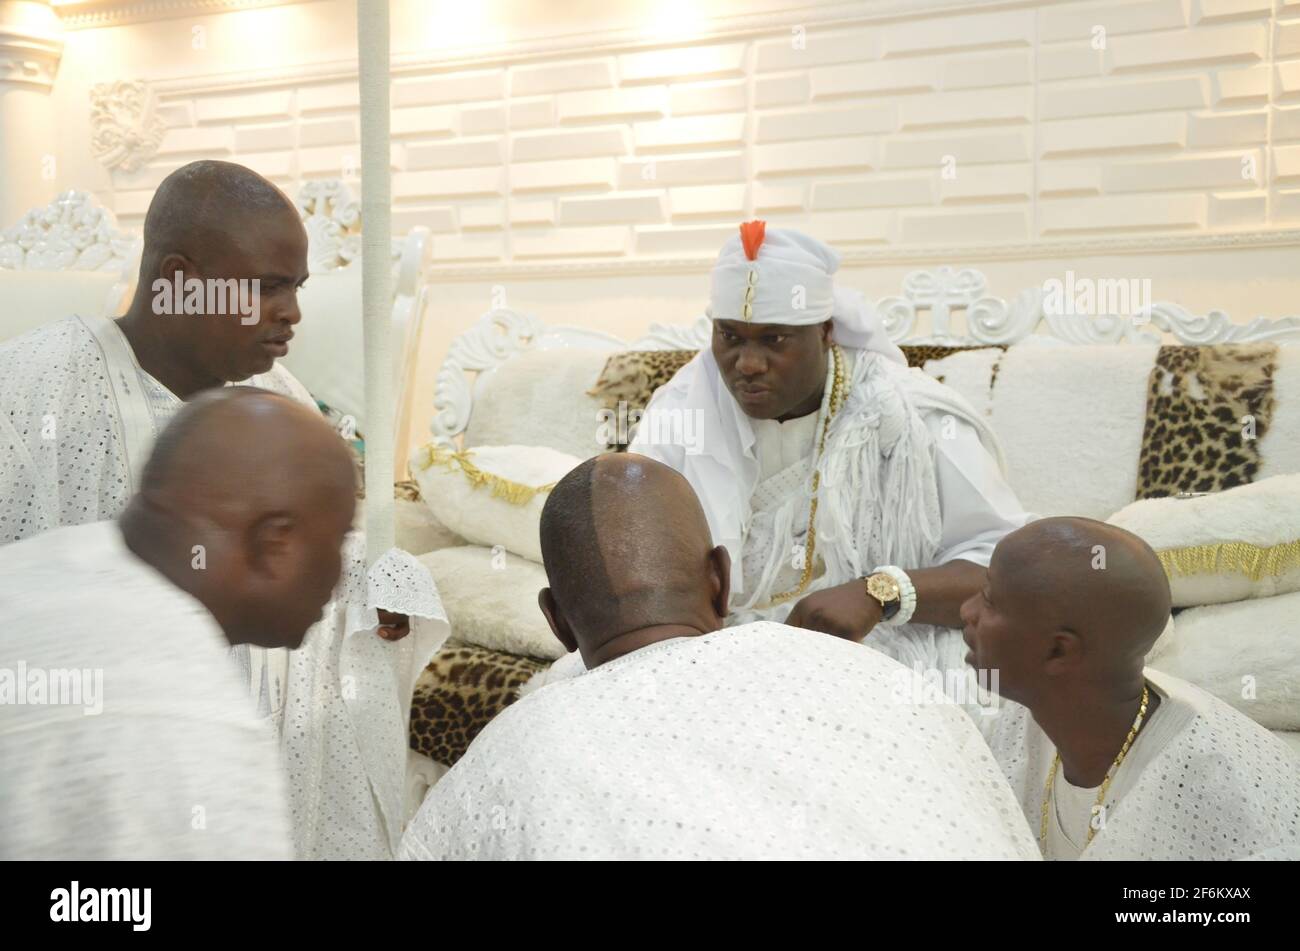 Ooni of Ife, Oba Adeyeye discussing with his palace chiefs (Emese) after seven-day seclusion to commune with the ancestors during the Olojo Festival. Stock Photo